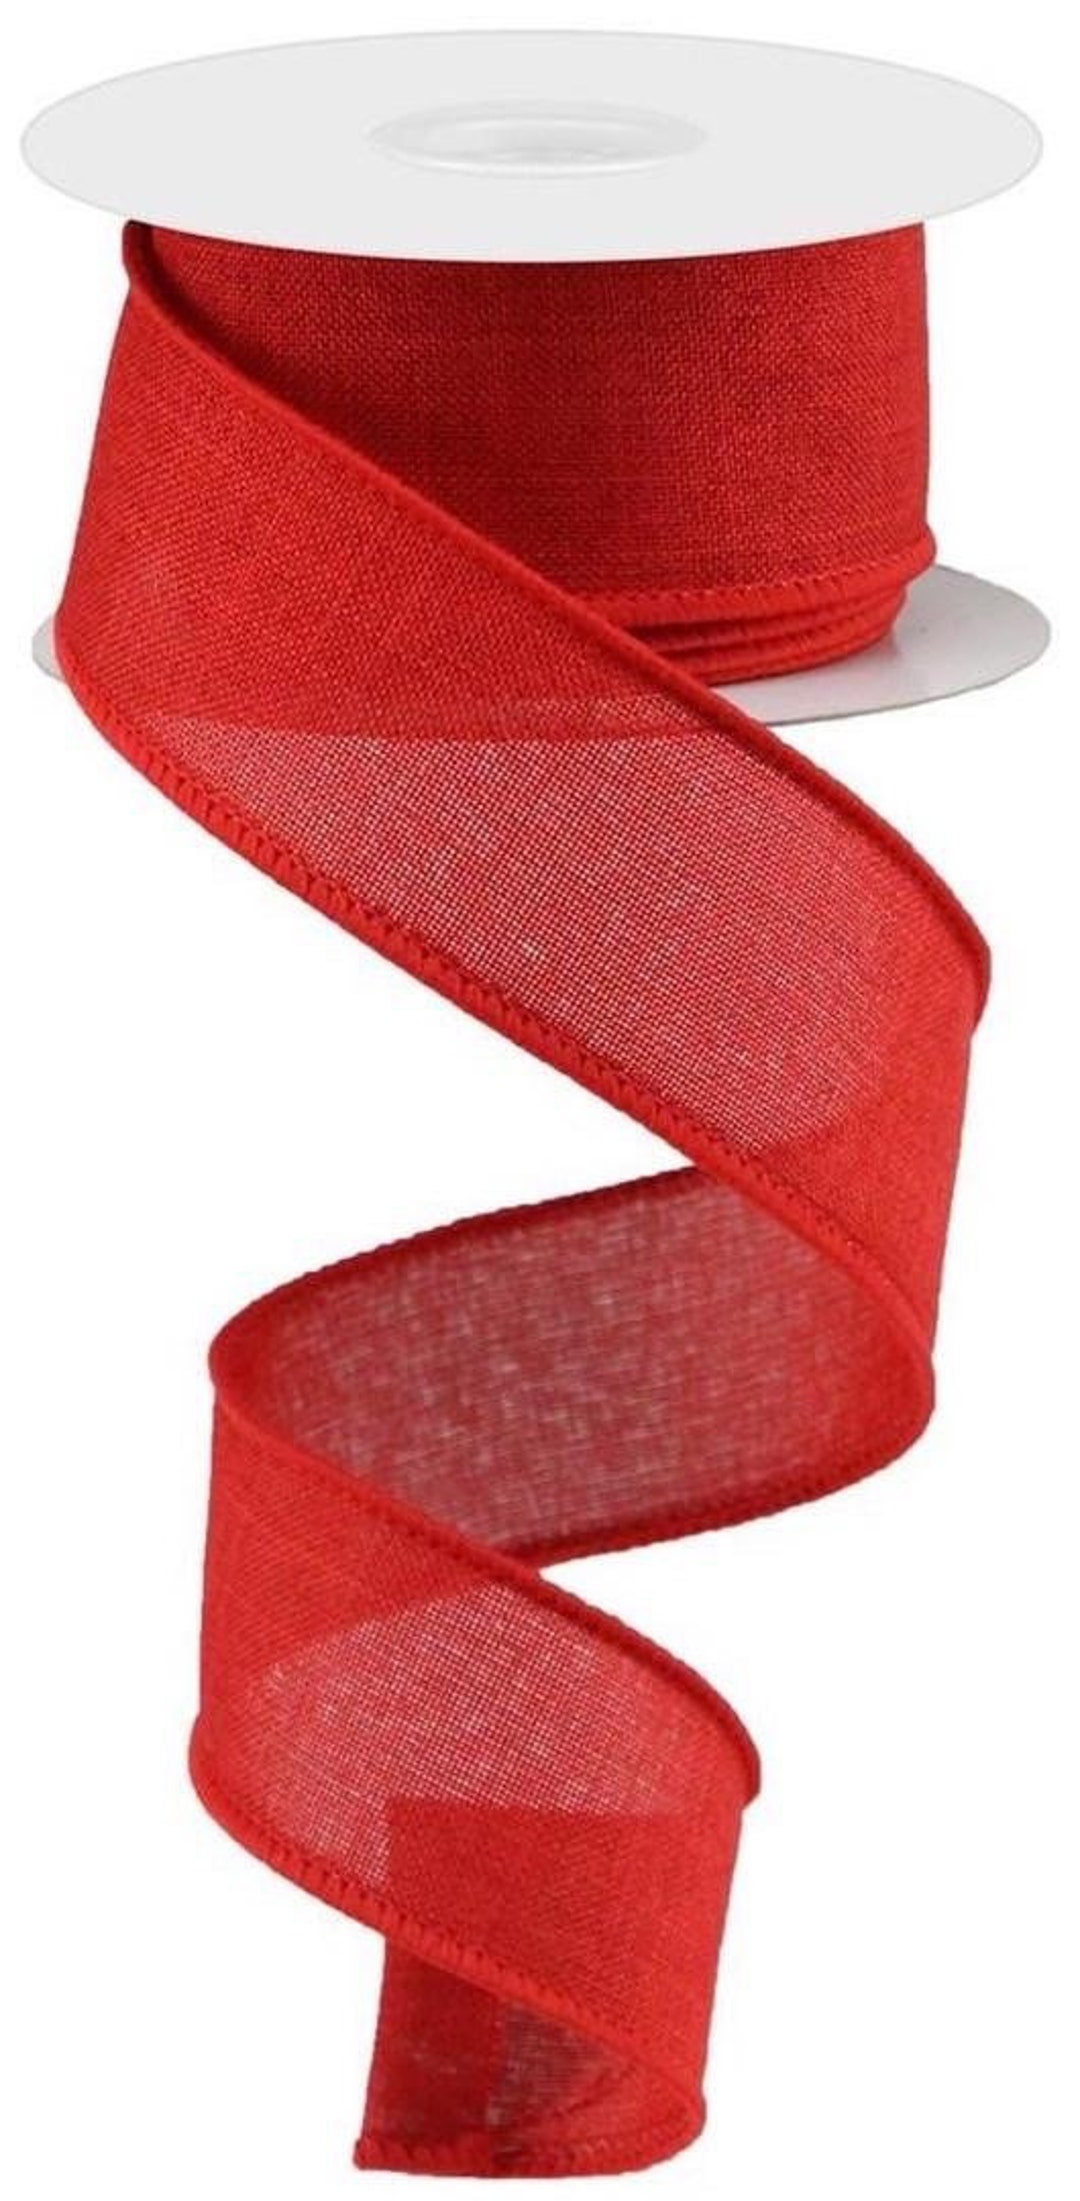 4 inch Red Burlap Ribbon with White Lace Edges - 5 Yards – Perpetual Ribbons